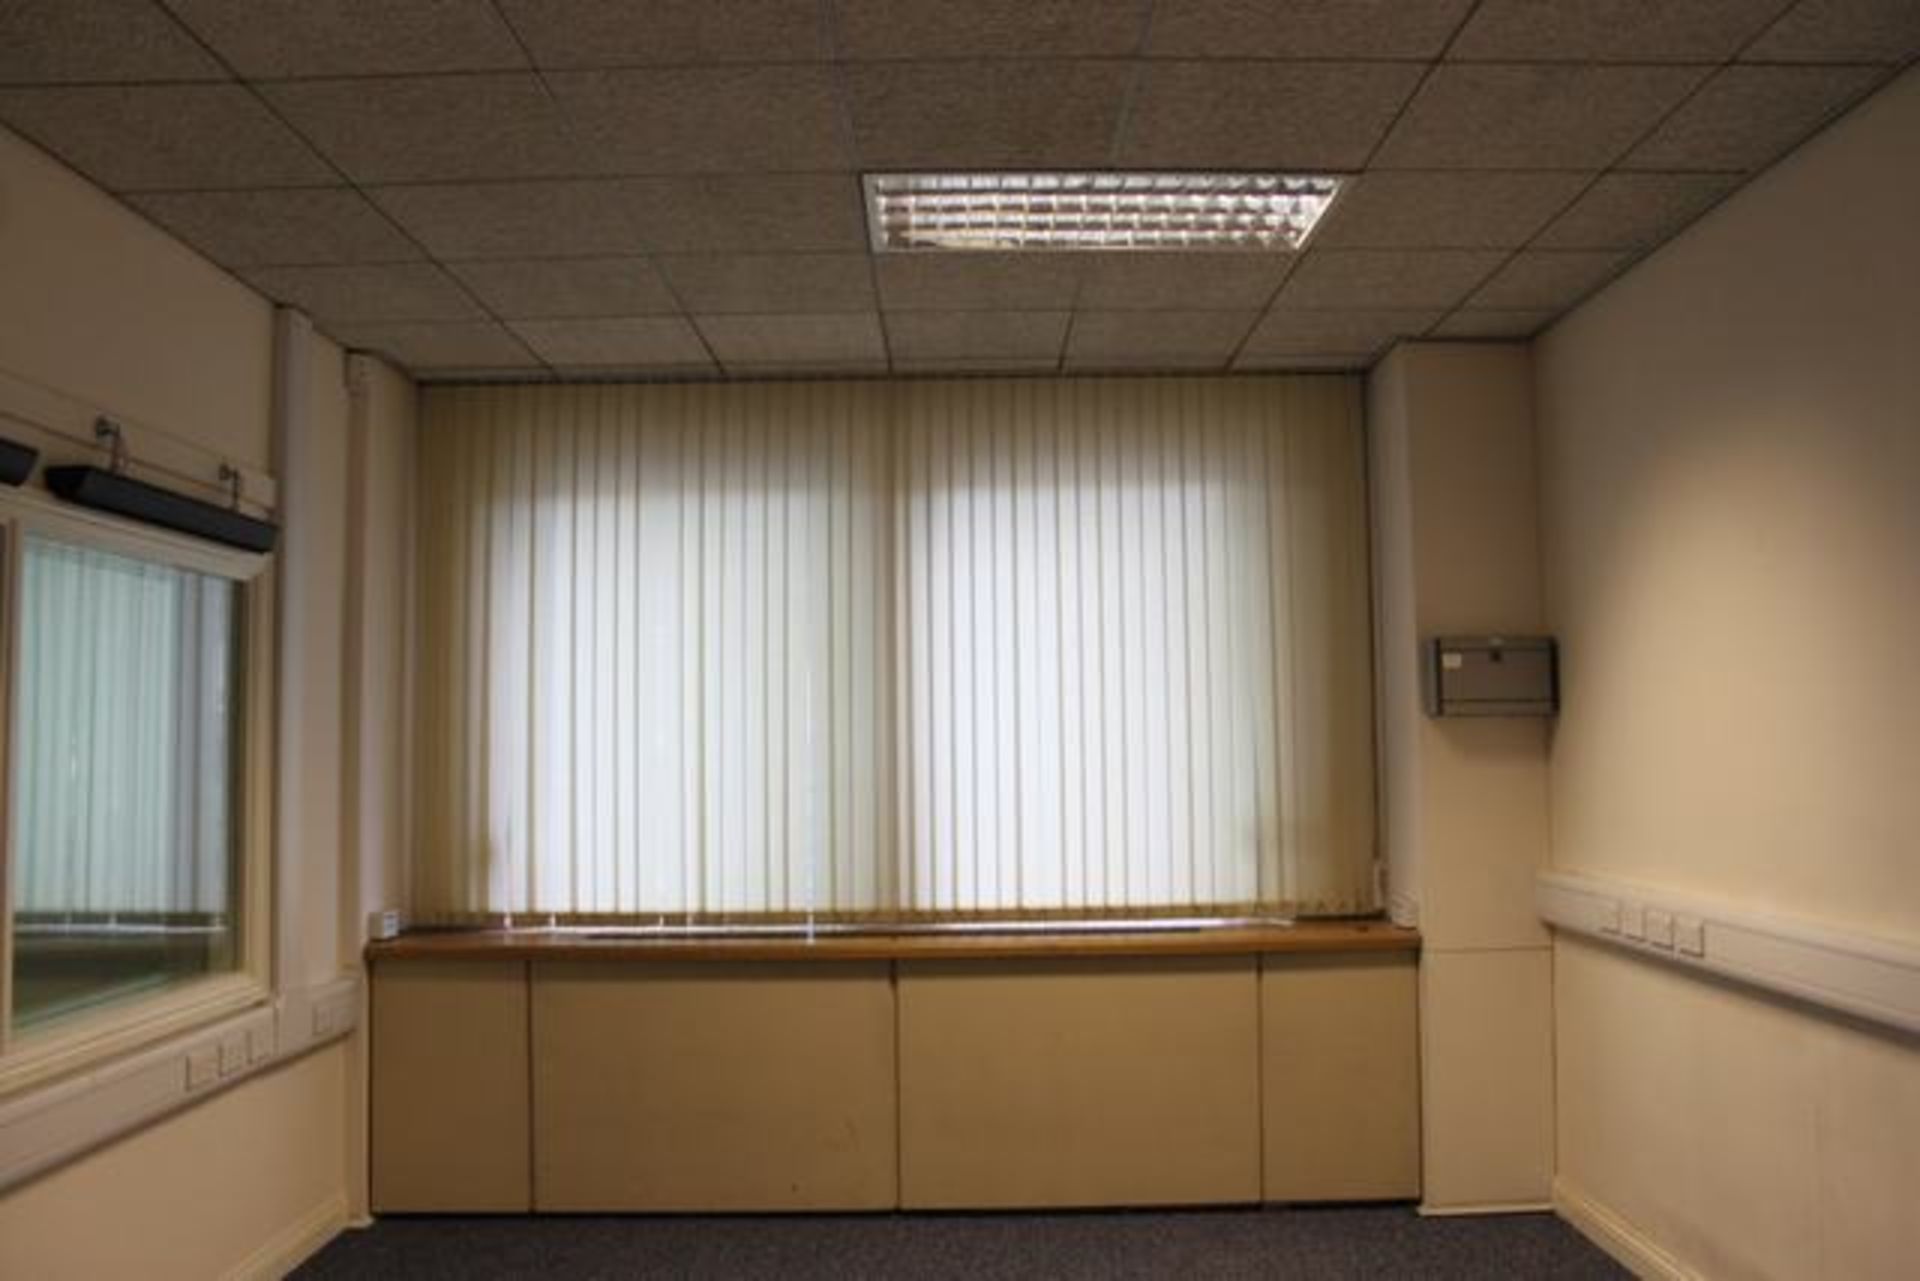 Vertical blind cream 2300mm x 1600mm complete with robust aluminium head rail with beaded tilt chain